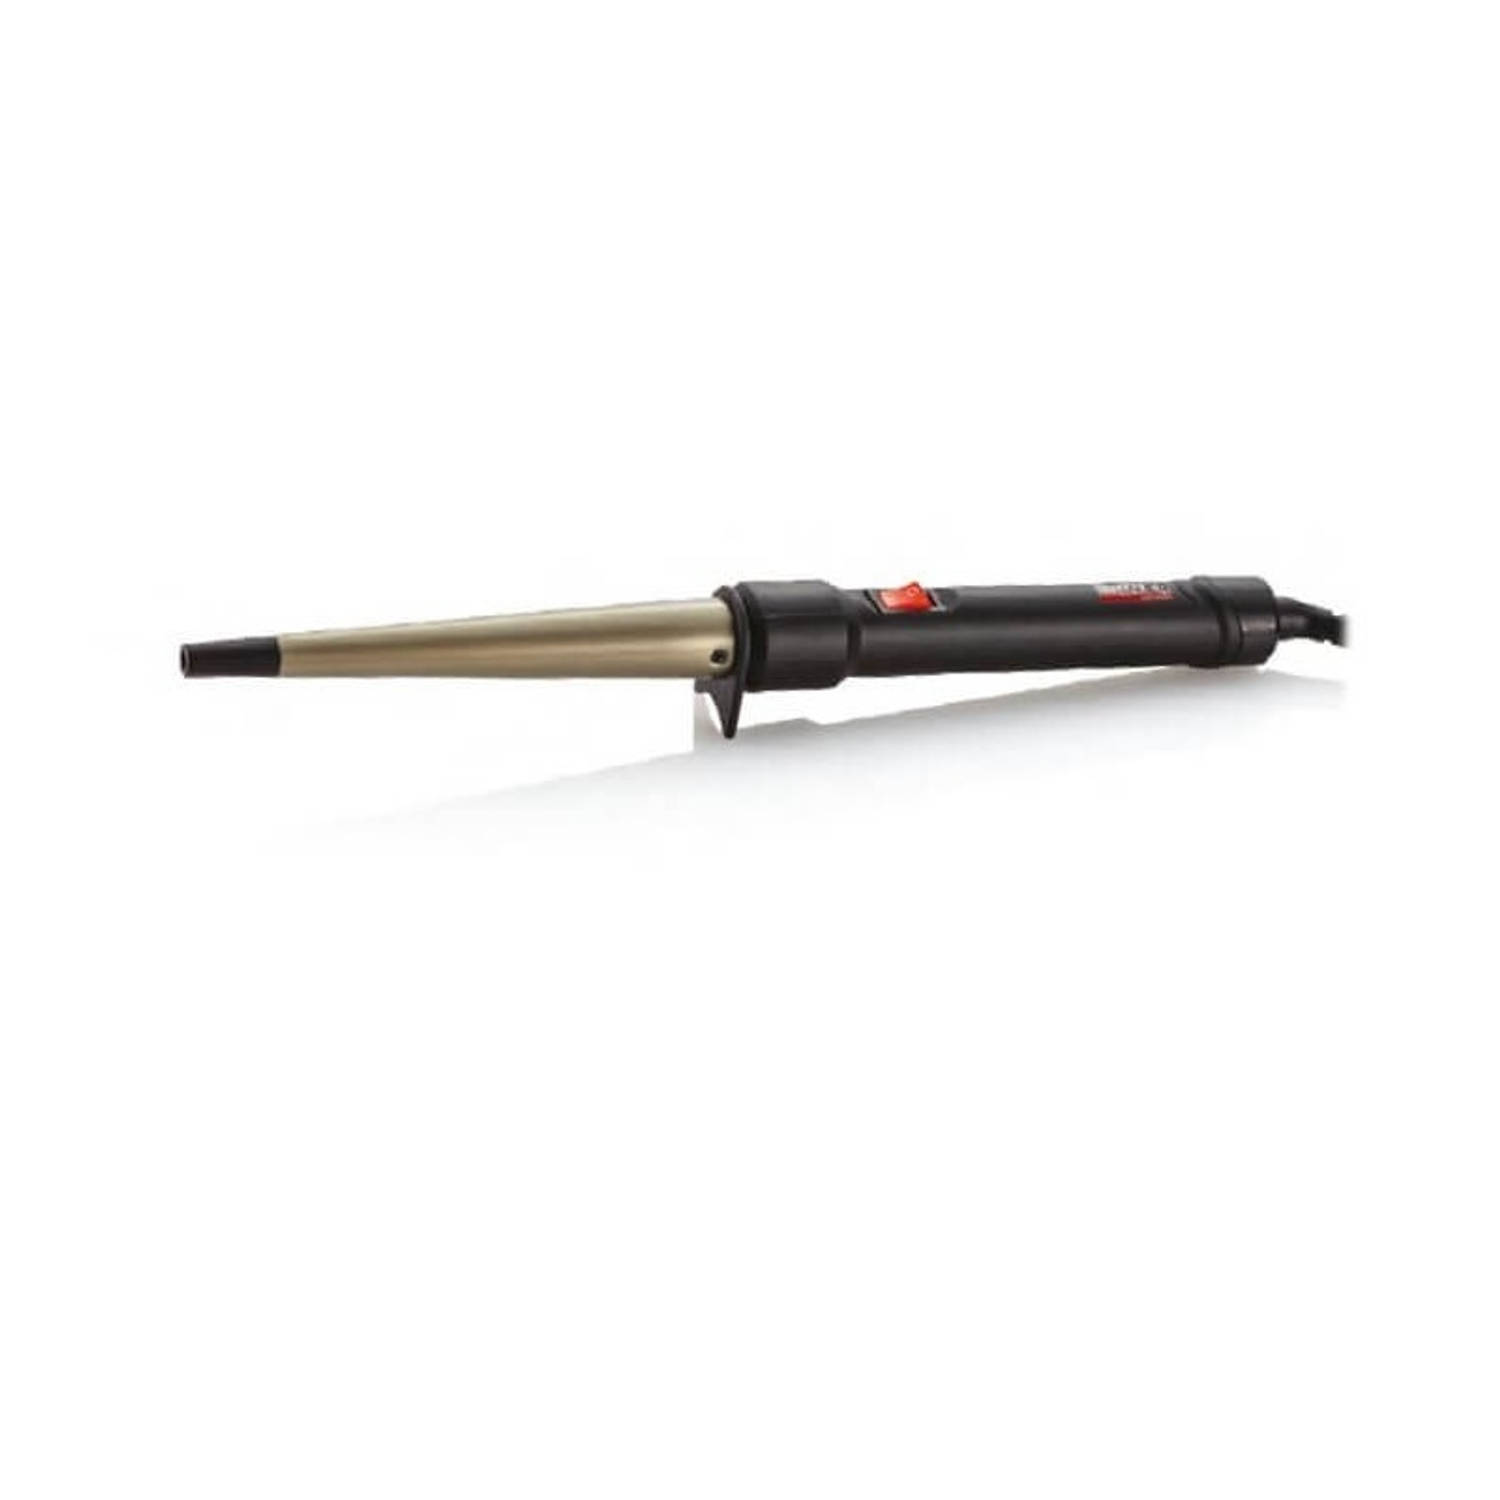 Sthauer Curling Iron Cone - 33mm